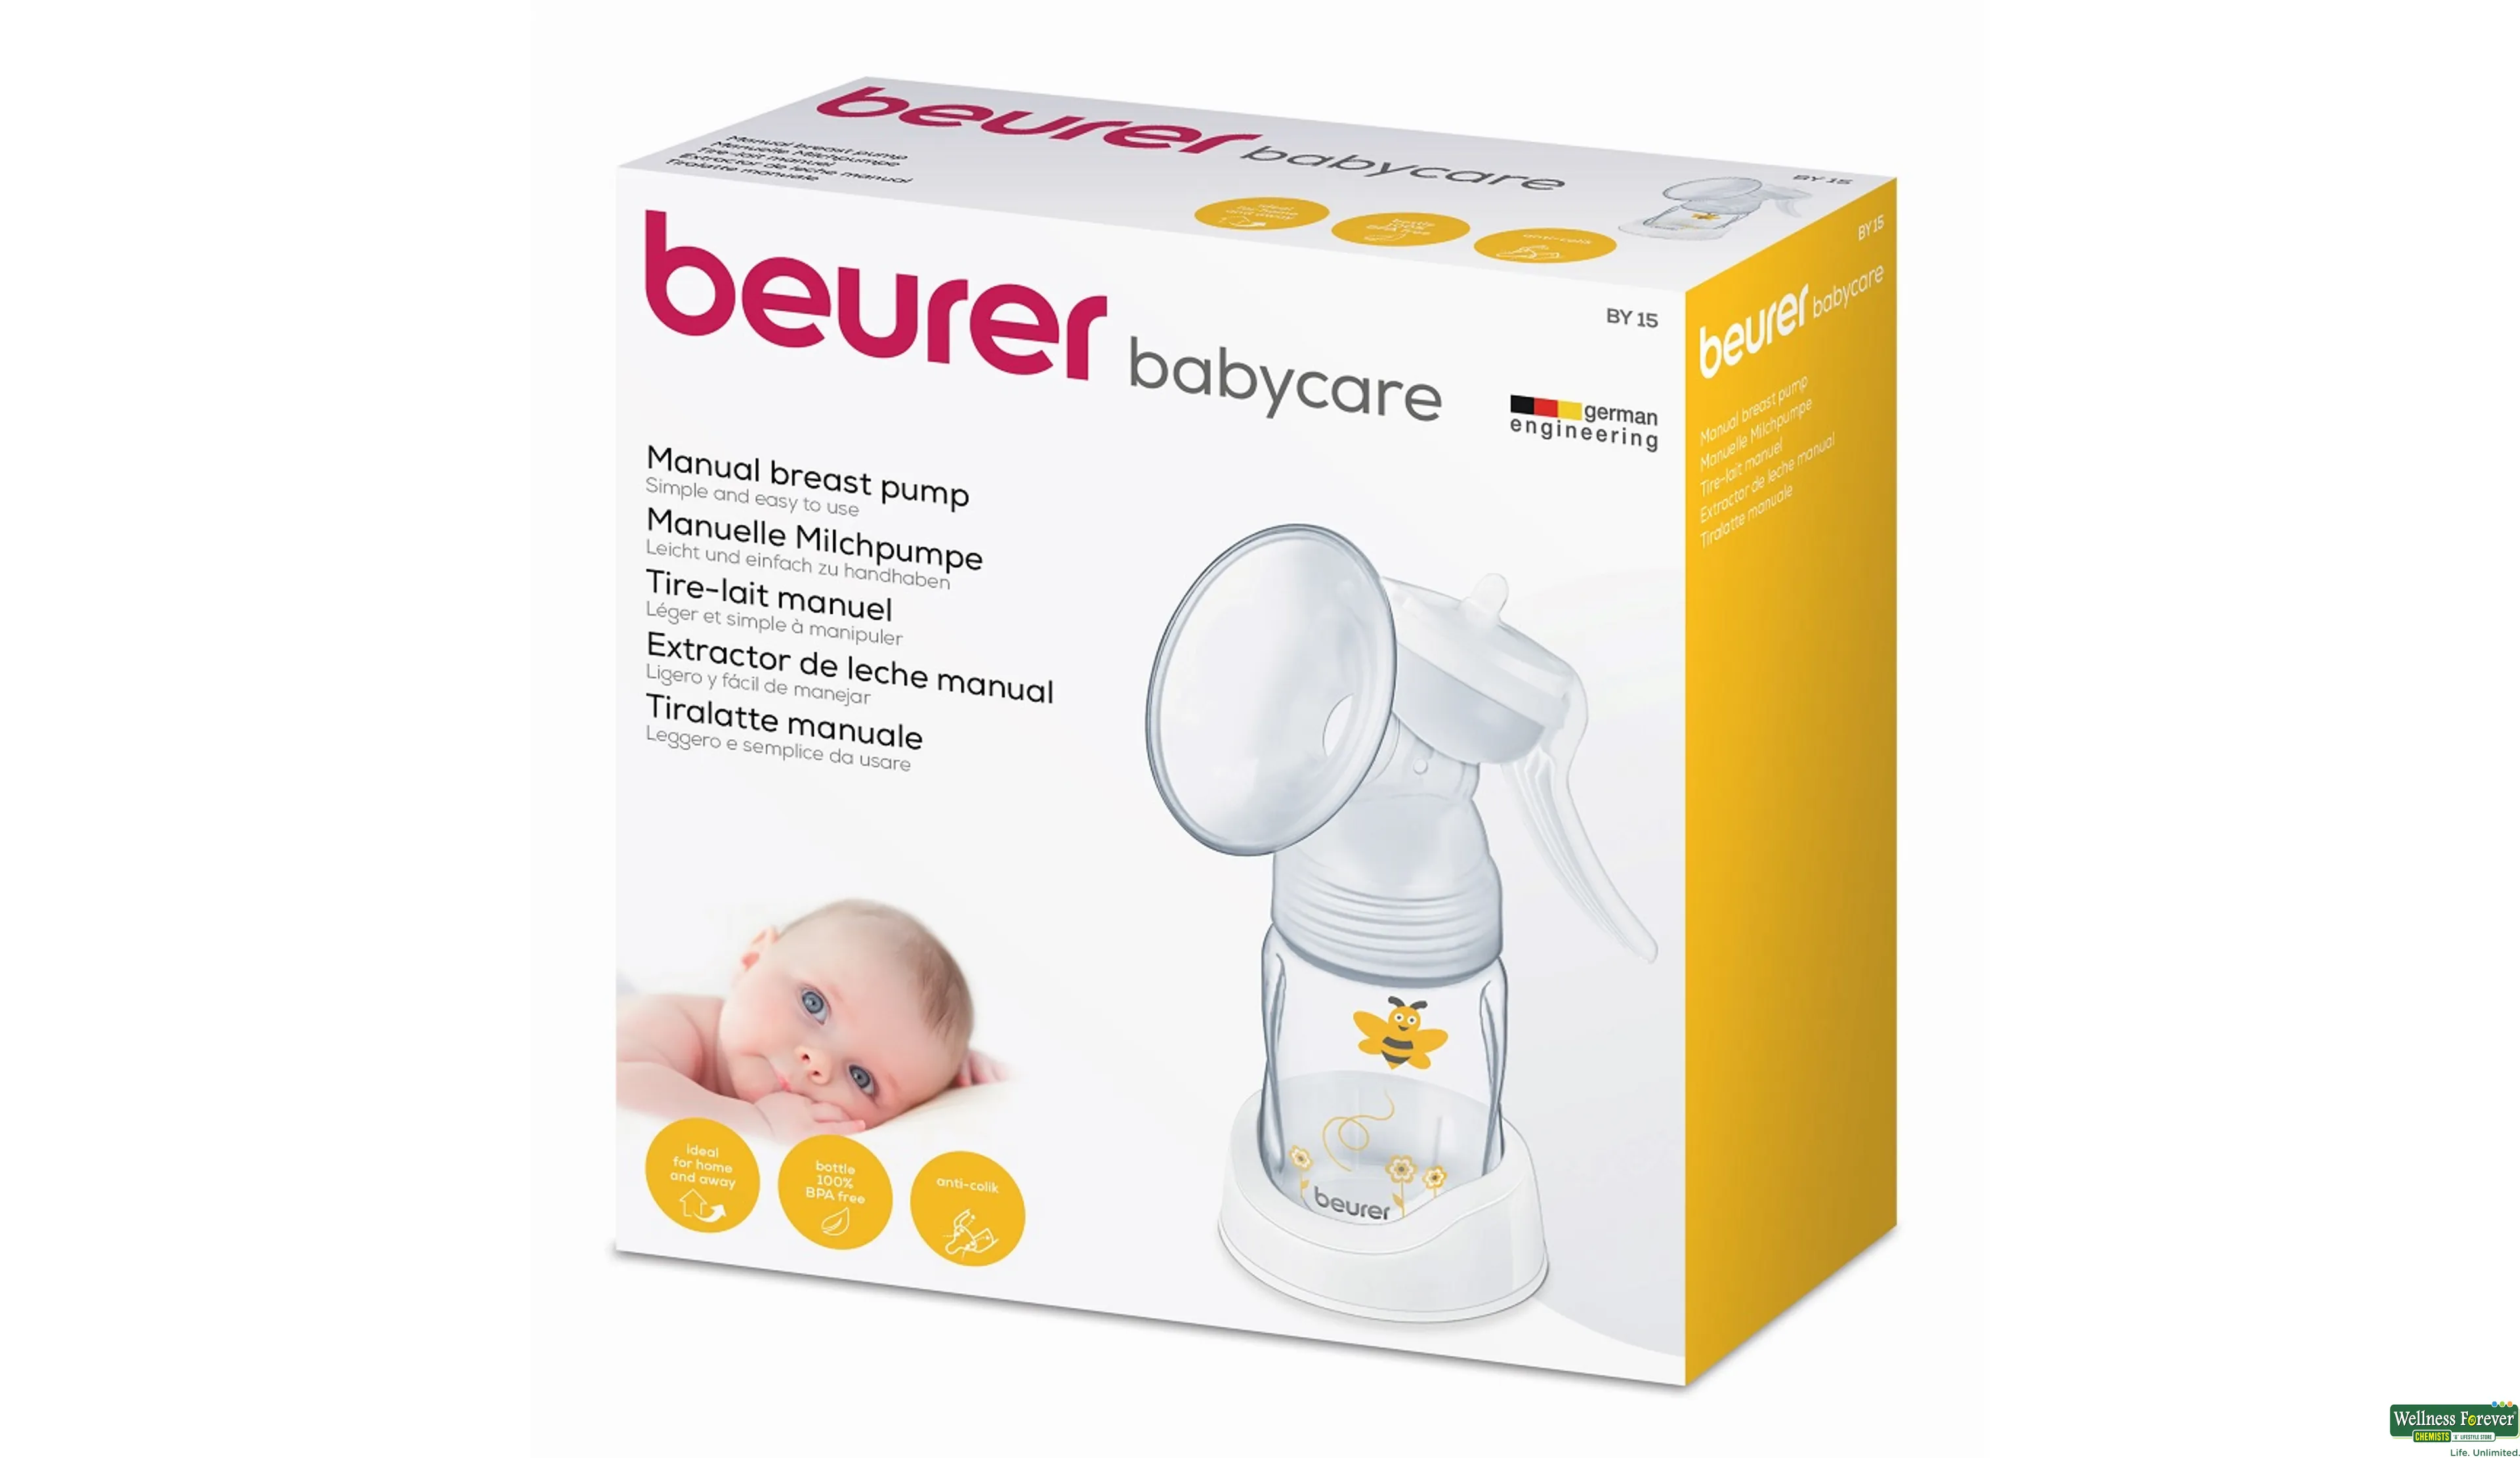 BEURER MANUAL BREAST PUMP BY15- 4, 1PC, 